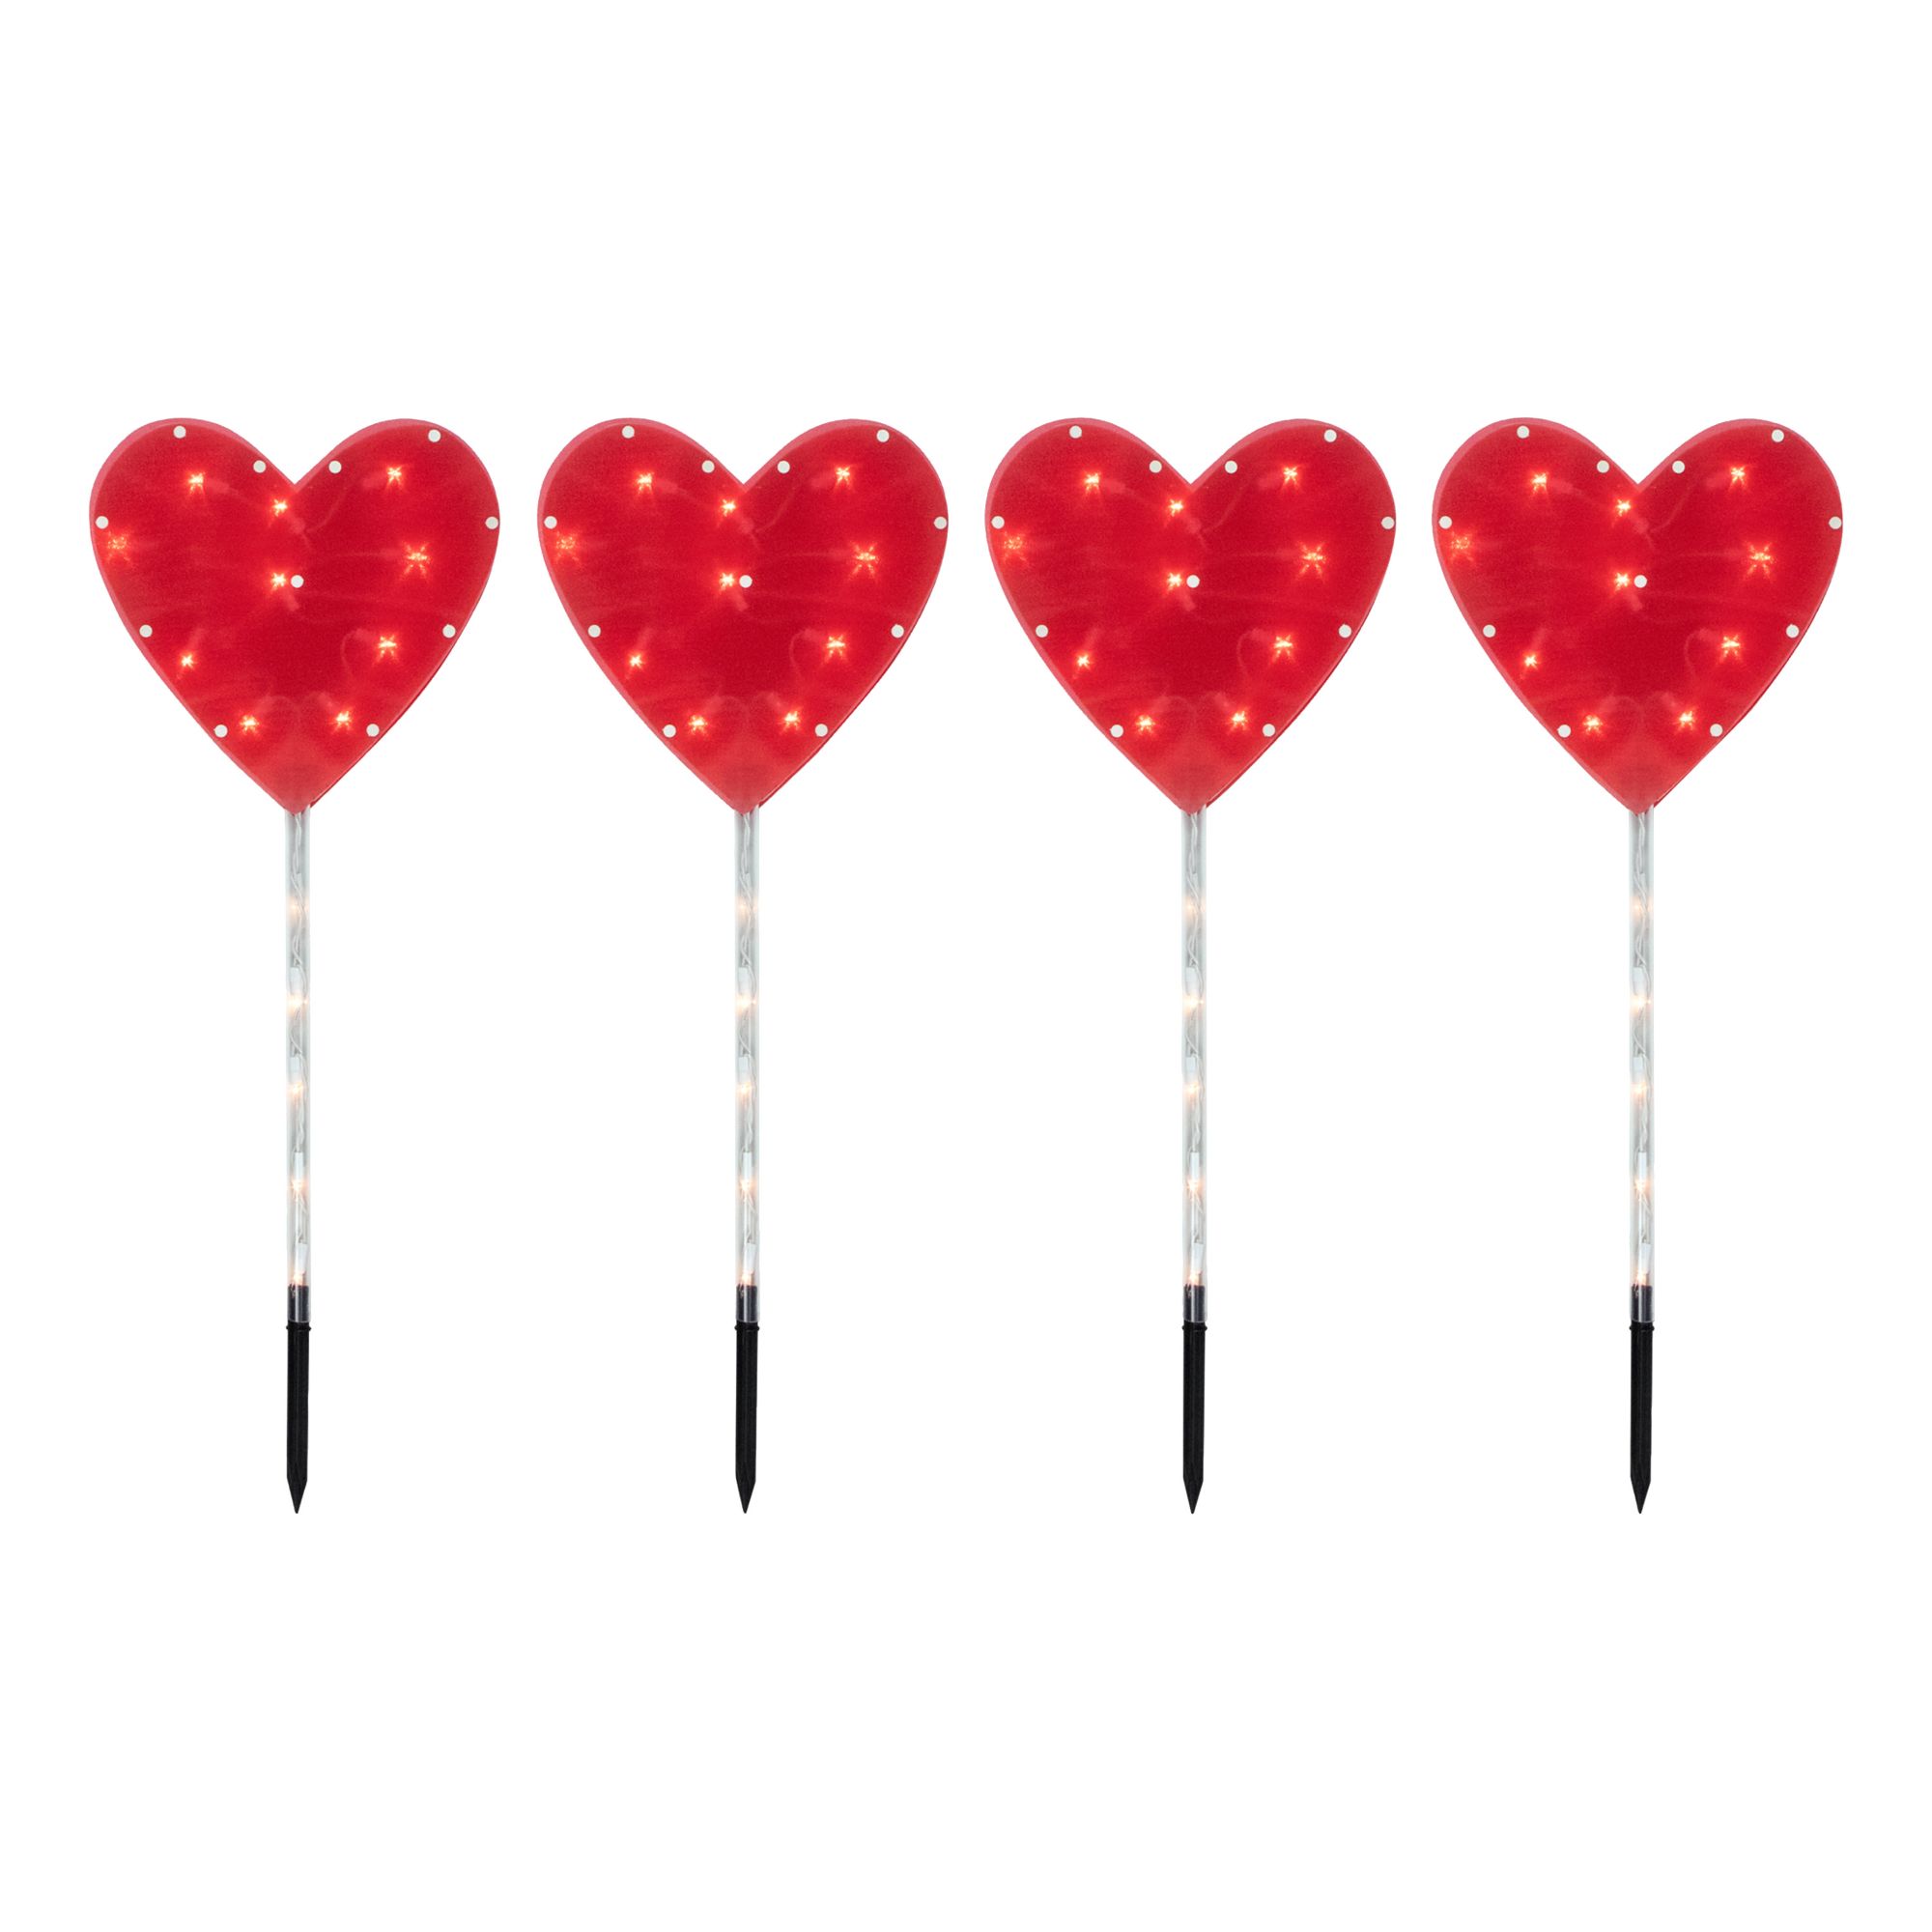 Northlight Red Heart Valentine's Day Pathway Marker Lawn Stake Lights, 4 ct.